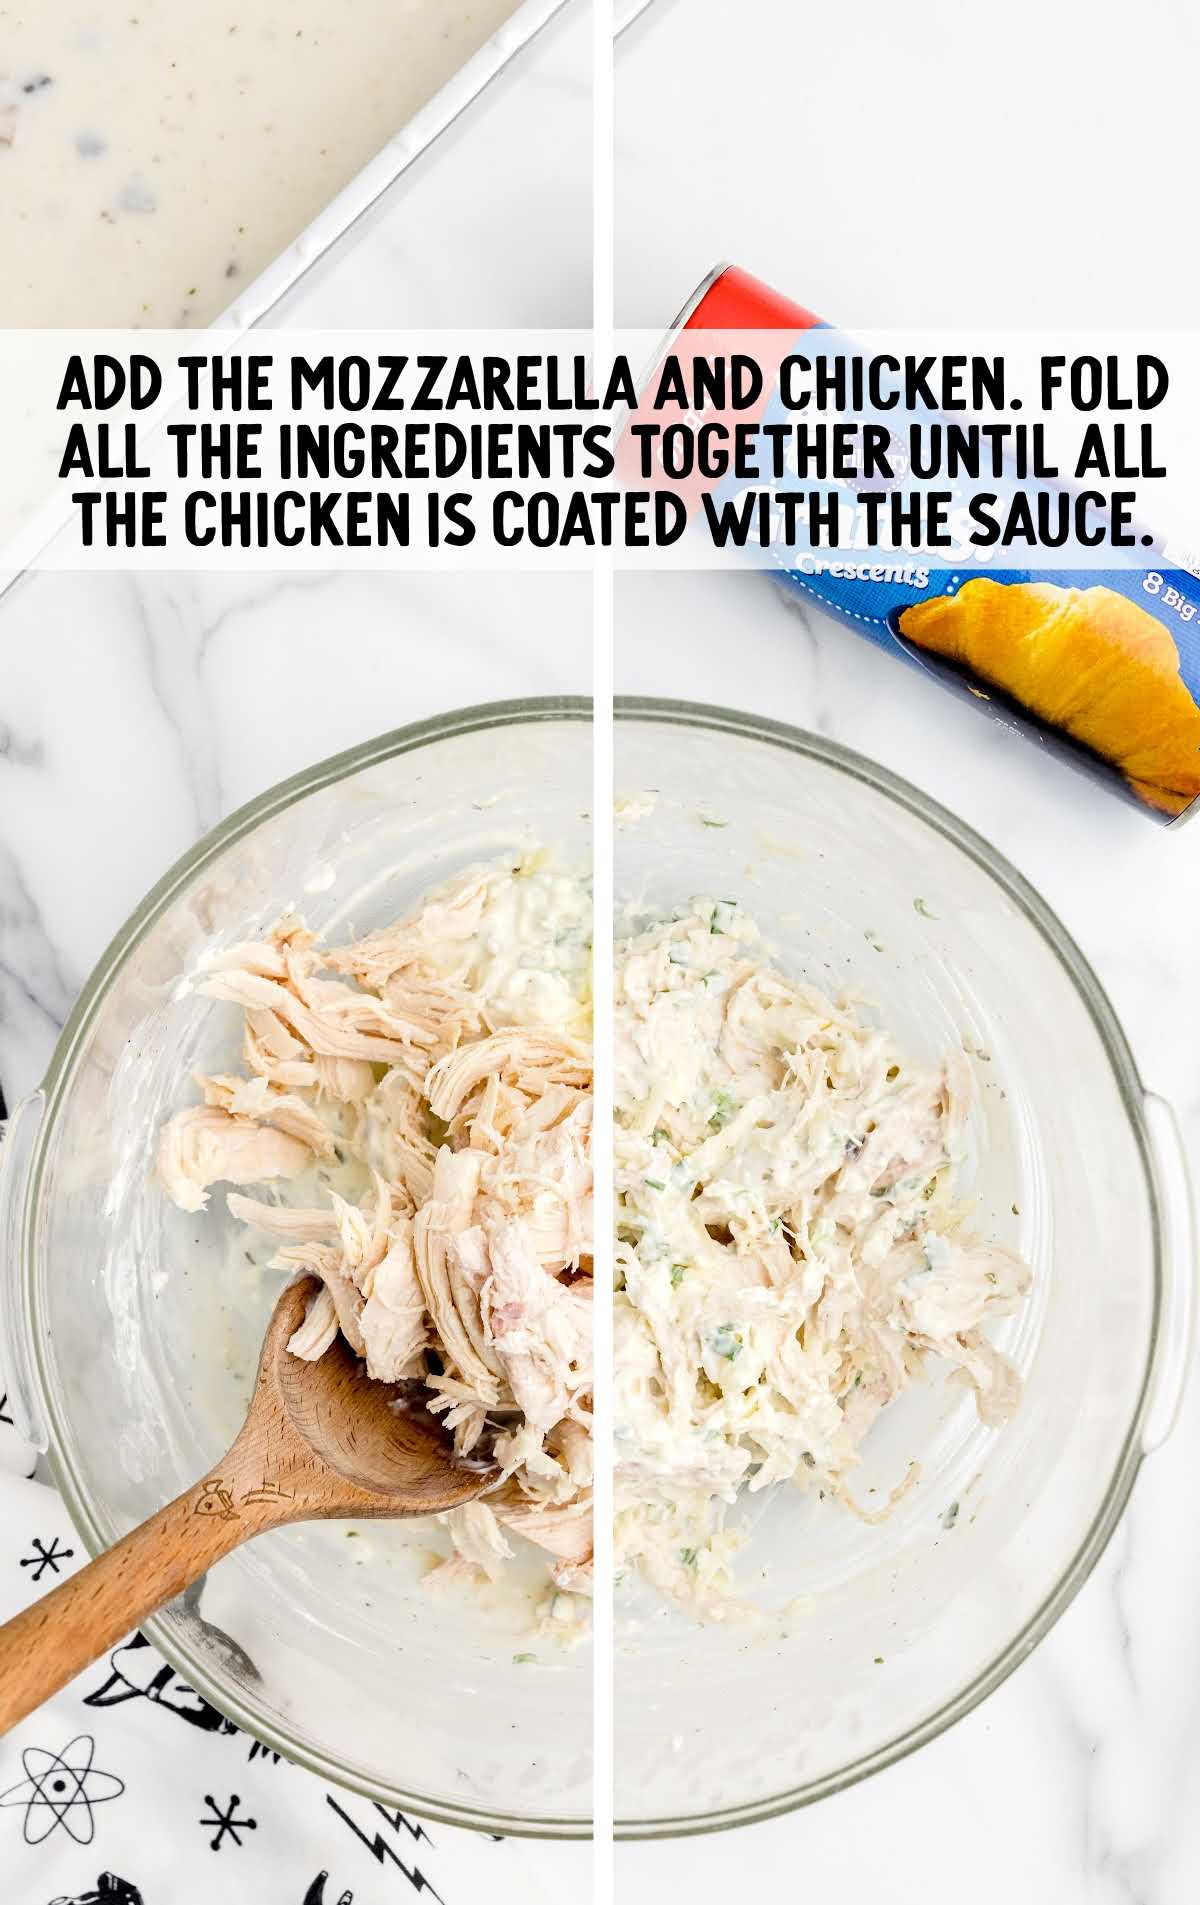 Mozzarella and chicken added to the cream cheese mixture